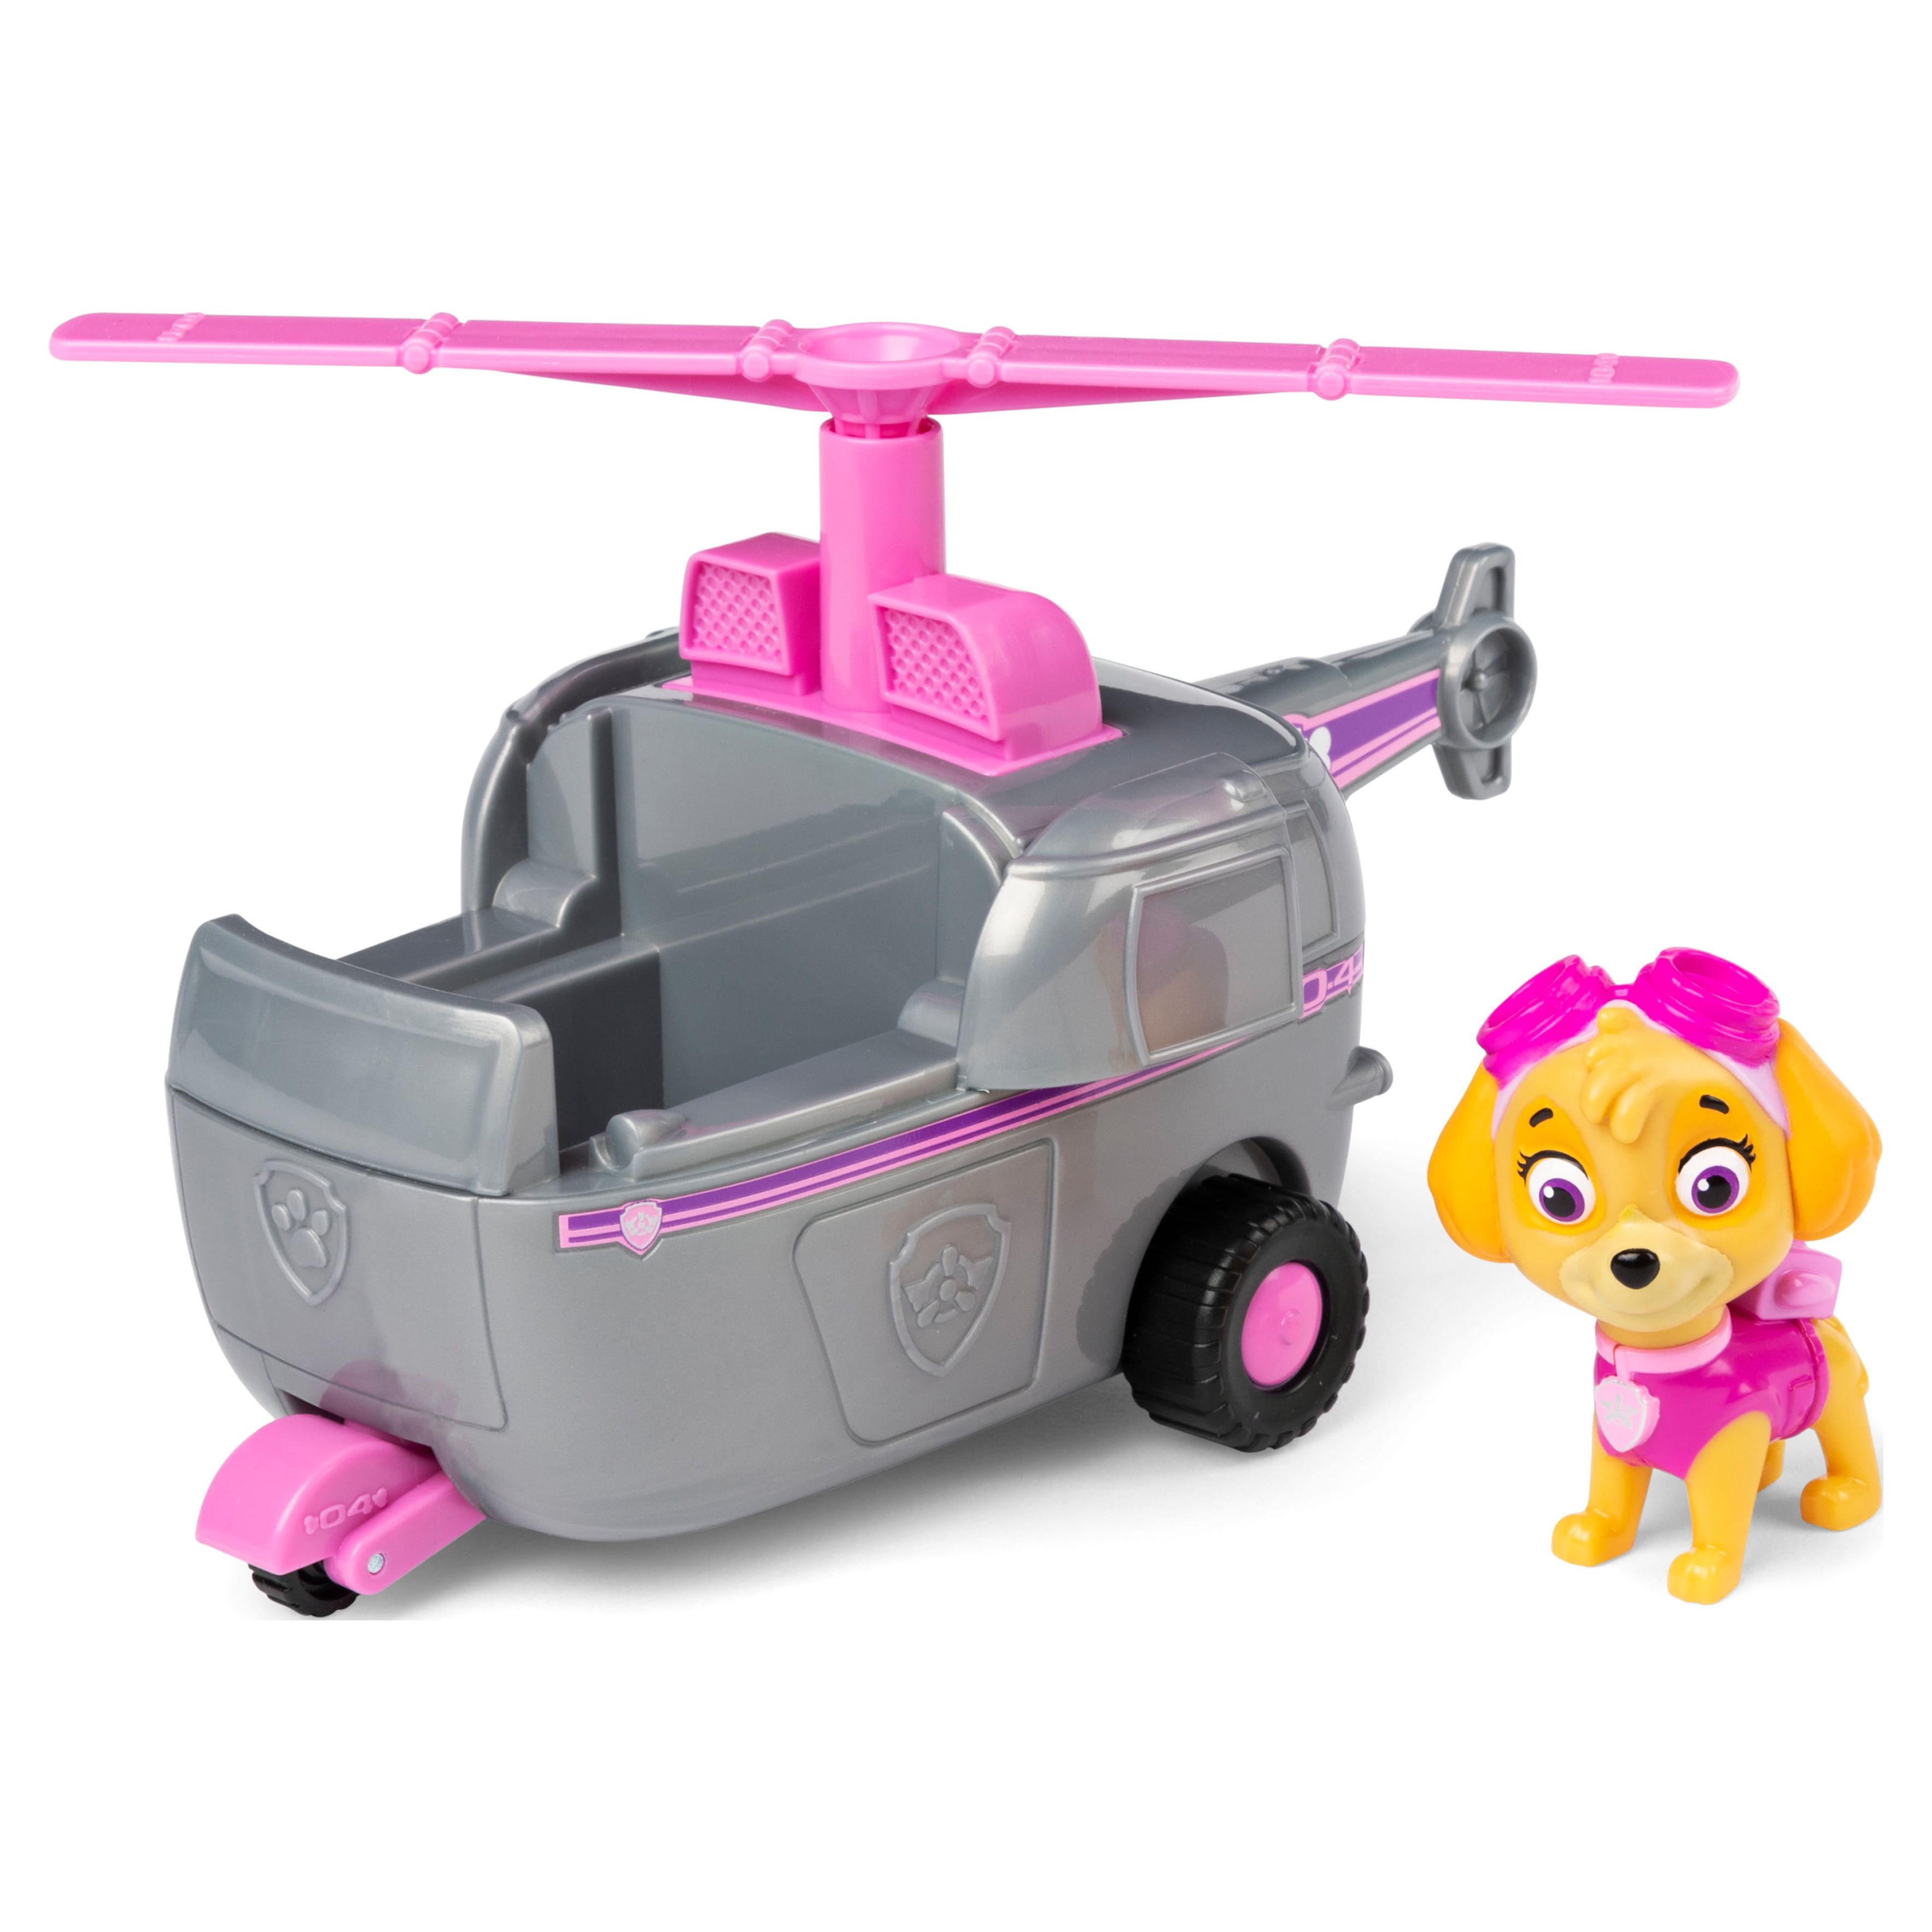 PAW Patrol, Skye’s Helicopter Vehicle with Collectible Figure, for Kids Aged 3 and Up - image 1 of 5